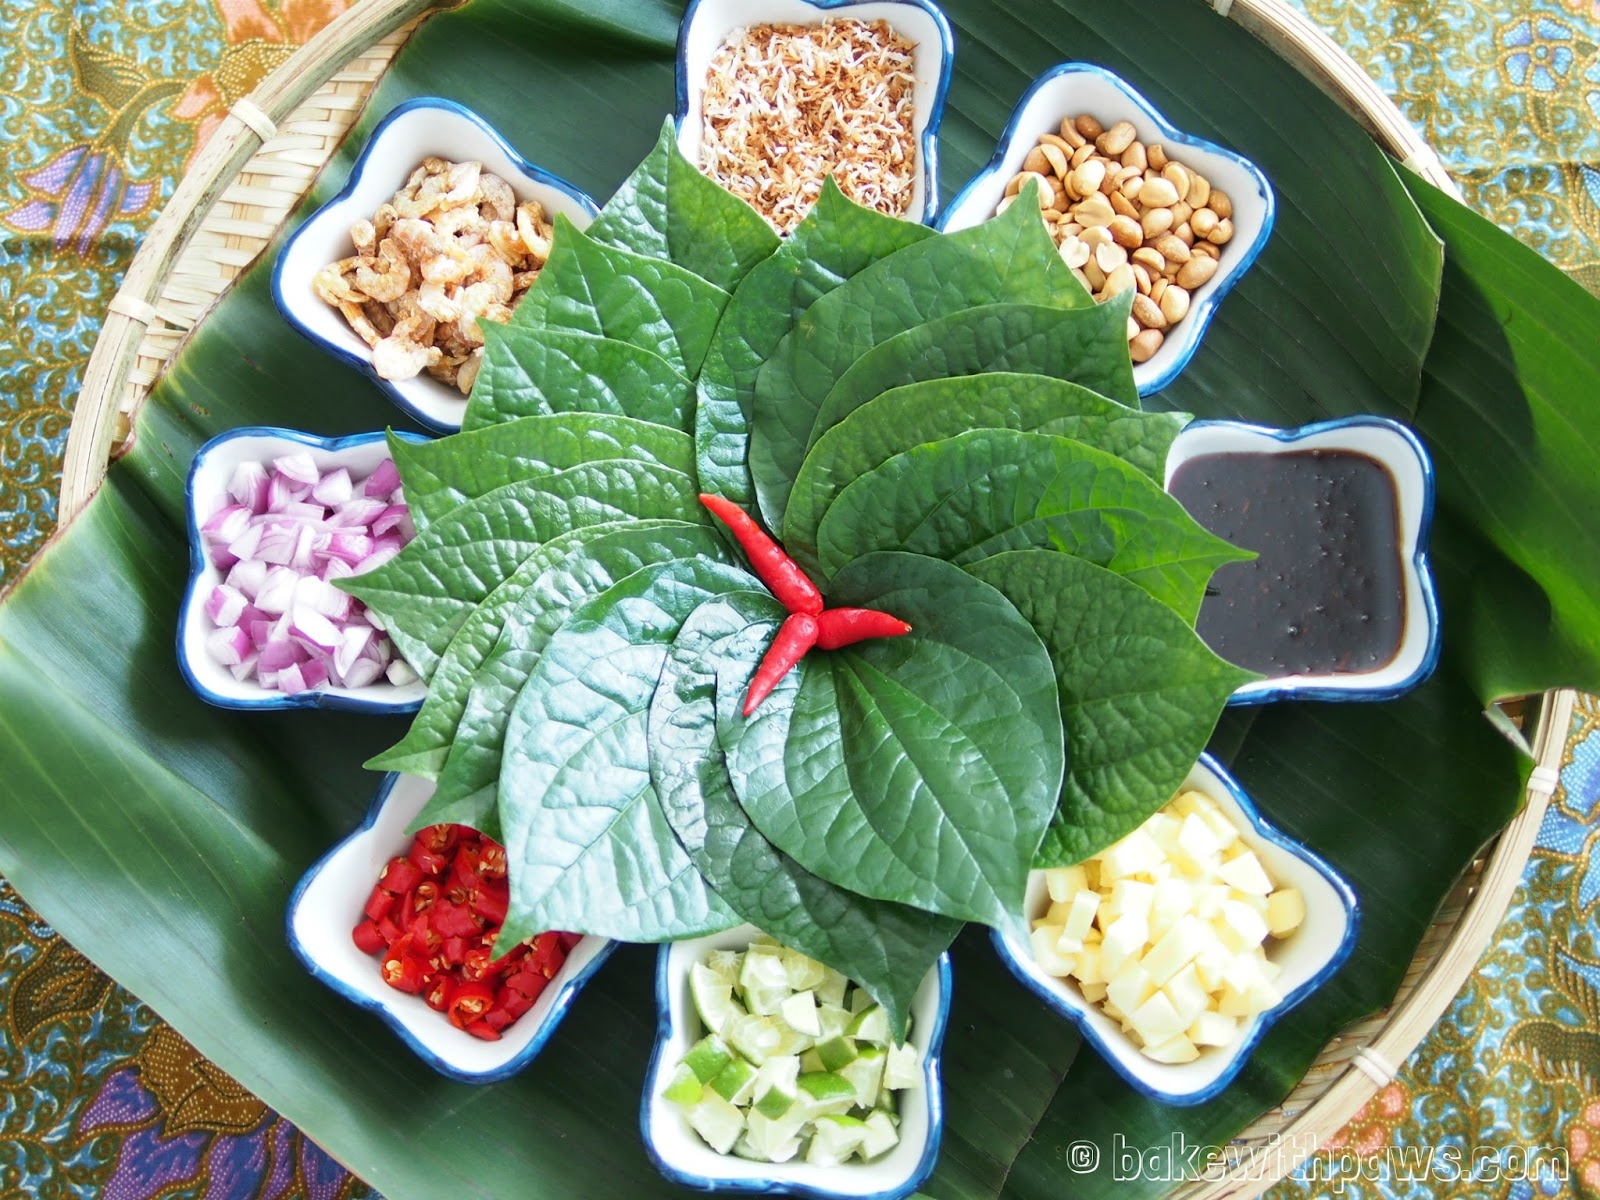 Can We Guess Your Age and Dream Job Based on What Thai Food You Order? Miang kham1